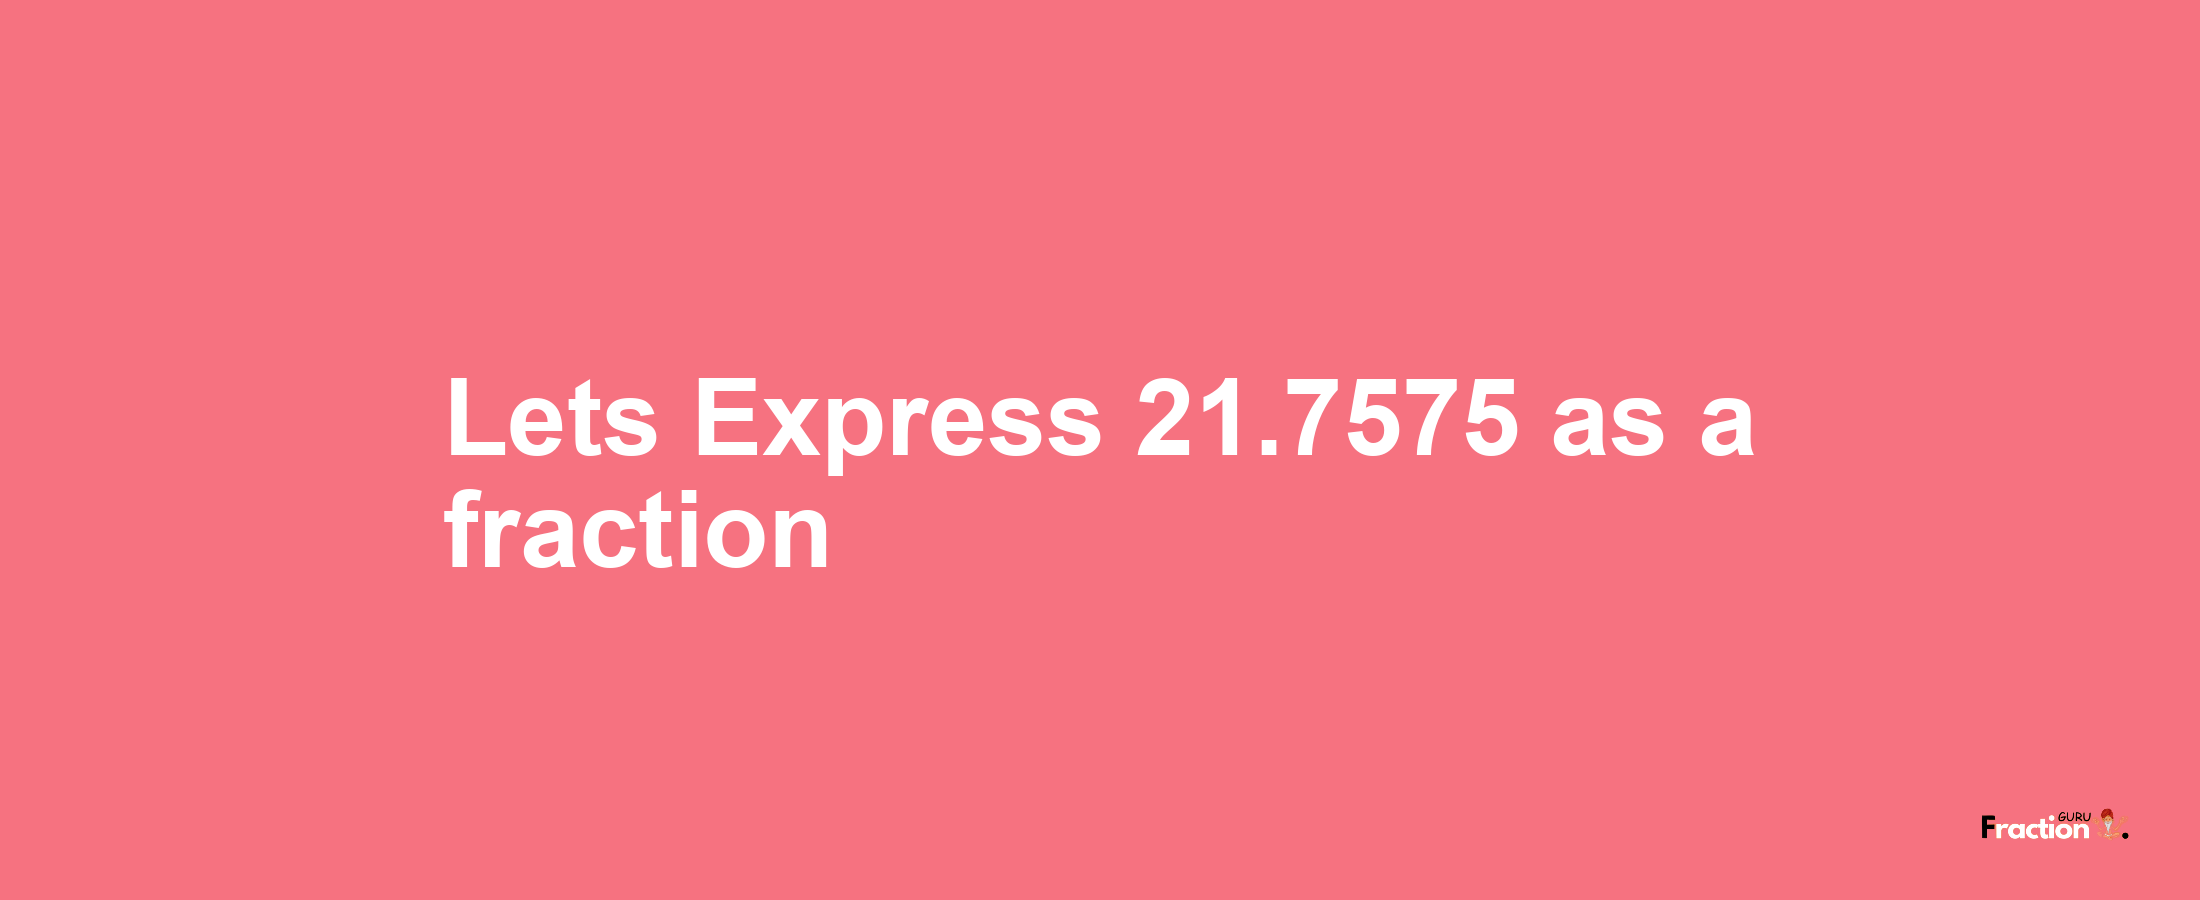 Lets Express 21.7575 as afraction